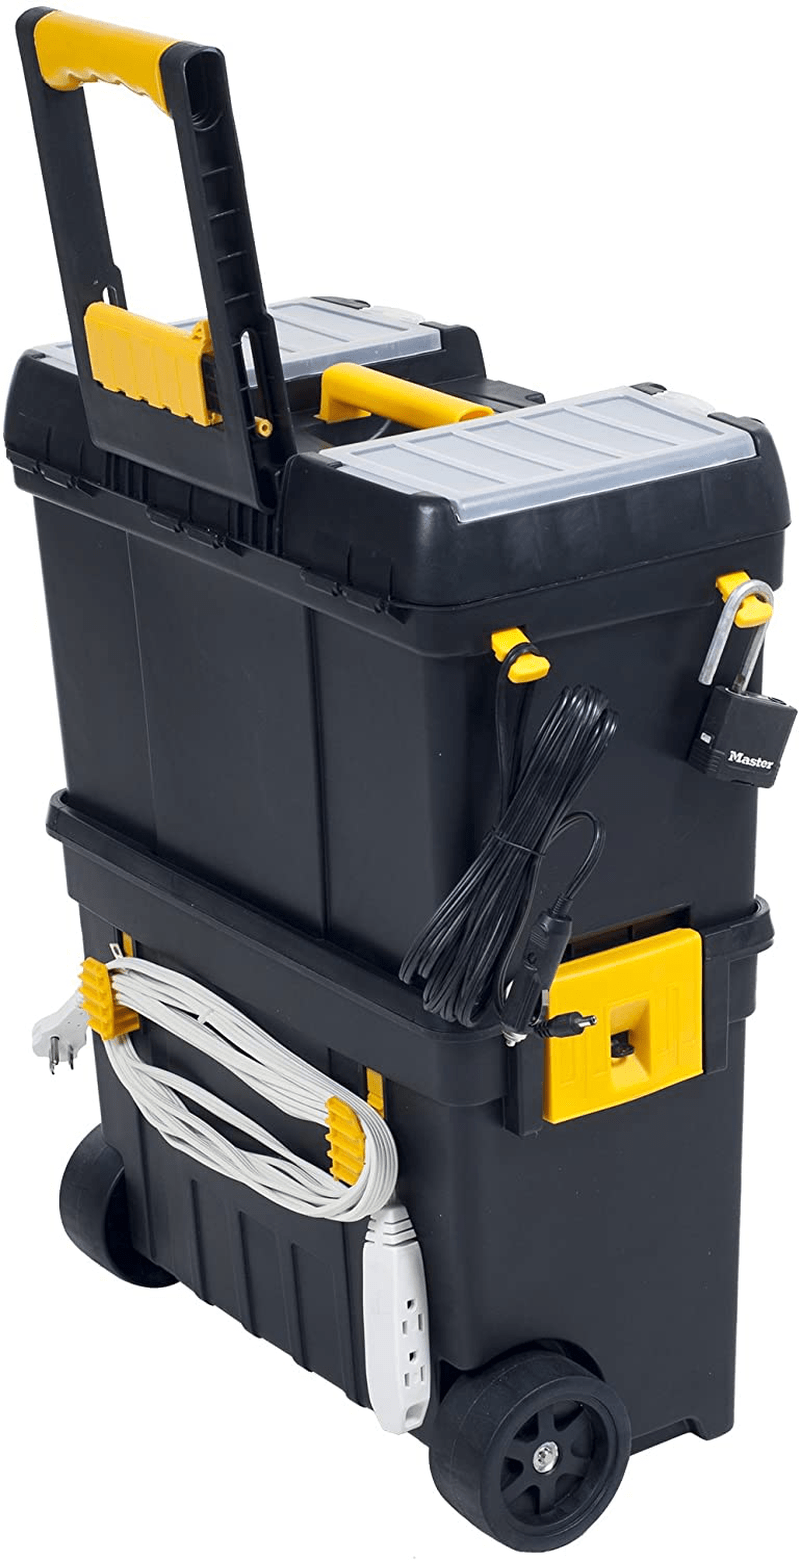 Rolling Tool Box with Wheels, Foldable Comfort Handle, and Removable Top – Toolbox Organizers and Storage by Stalwart